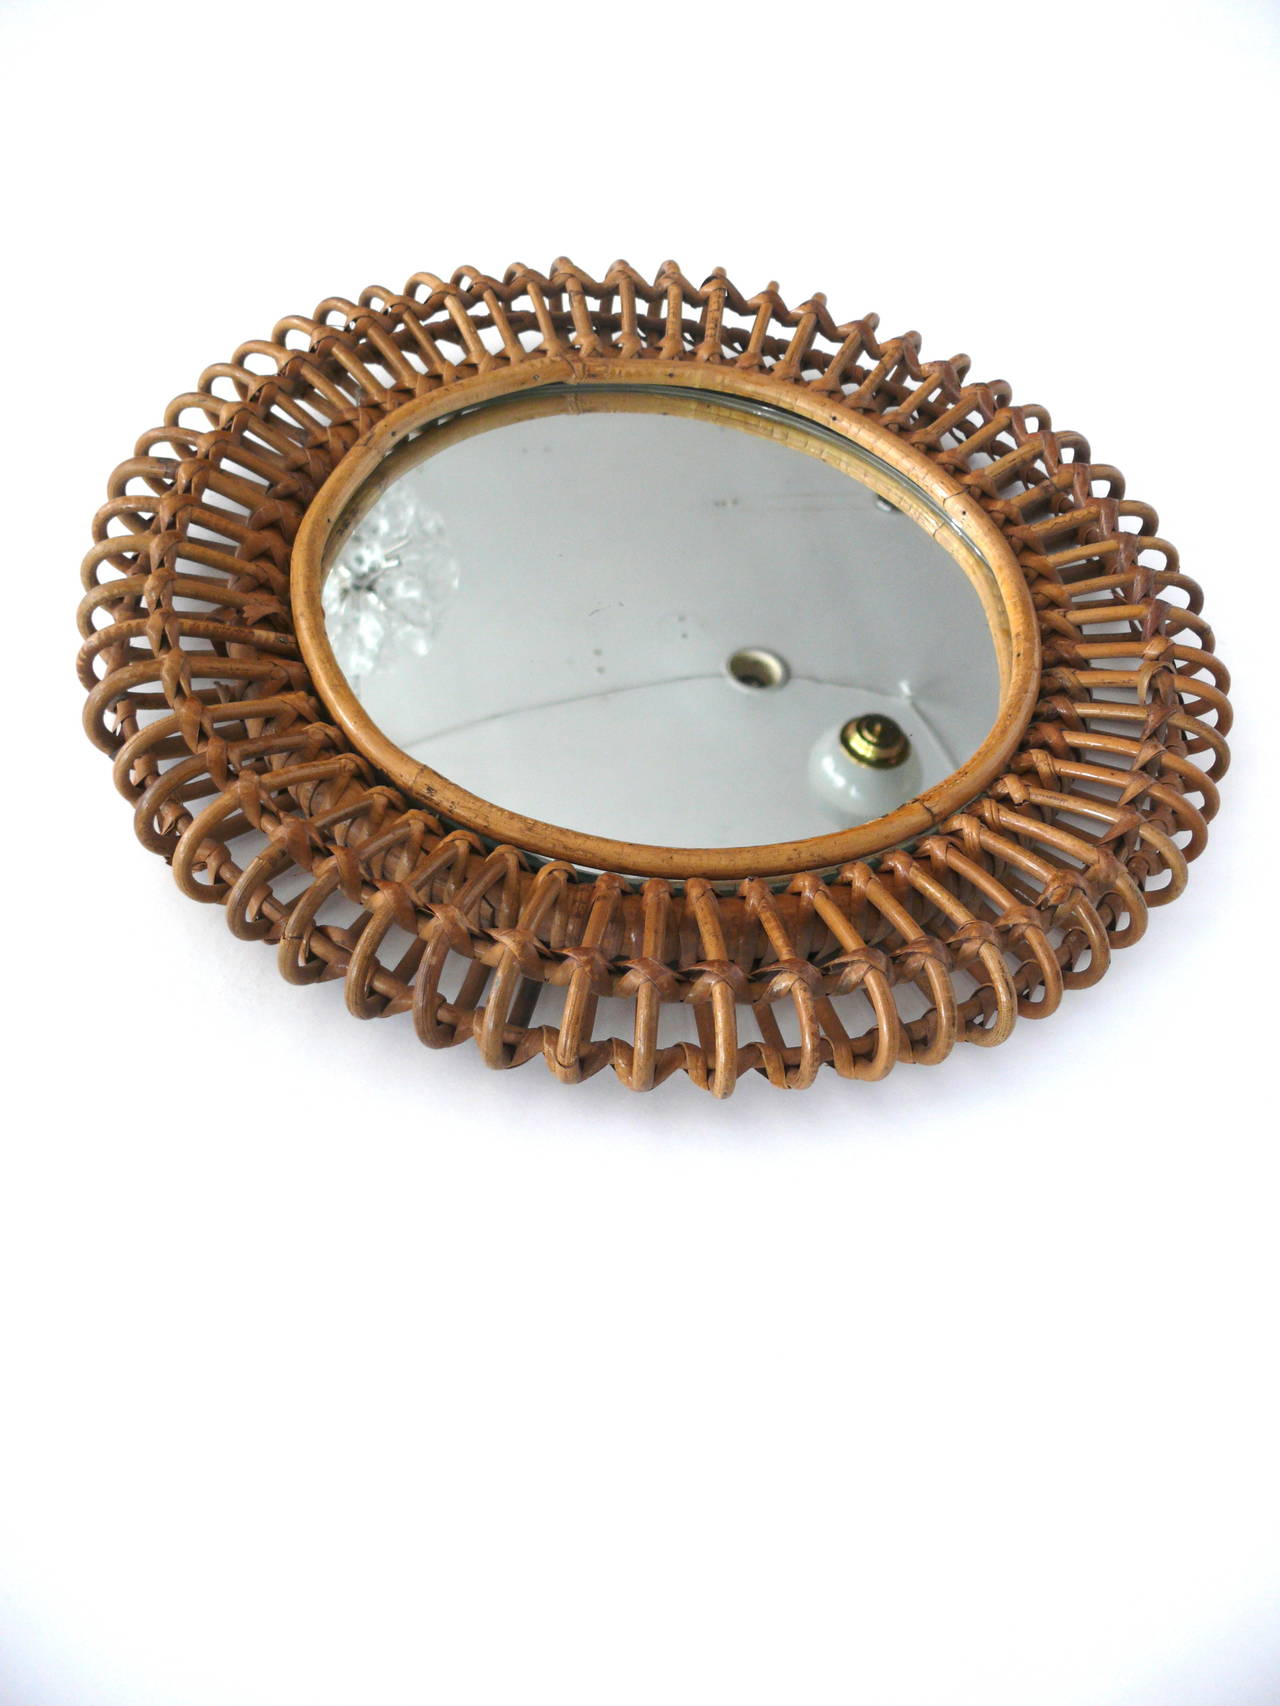 Incredible French bamboo and rattan mirror. Rounded bamboo and interlocking strands of rattan. Excellent vintage condition. Very unique.